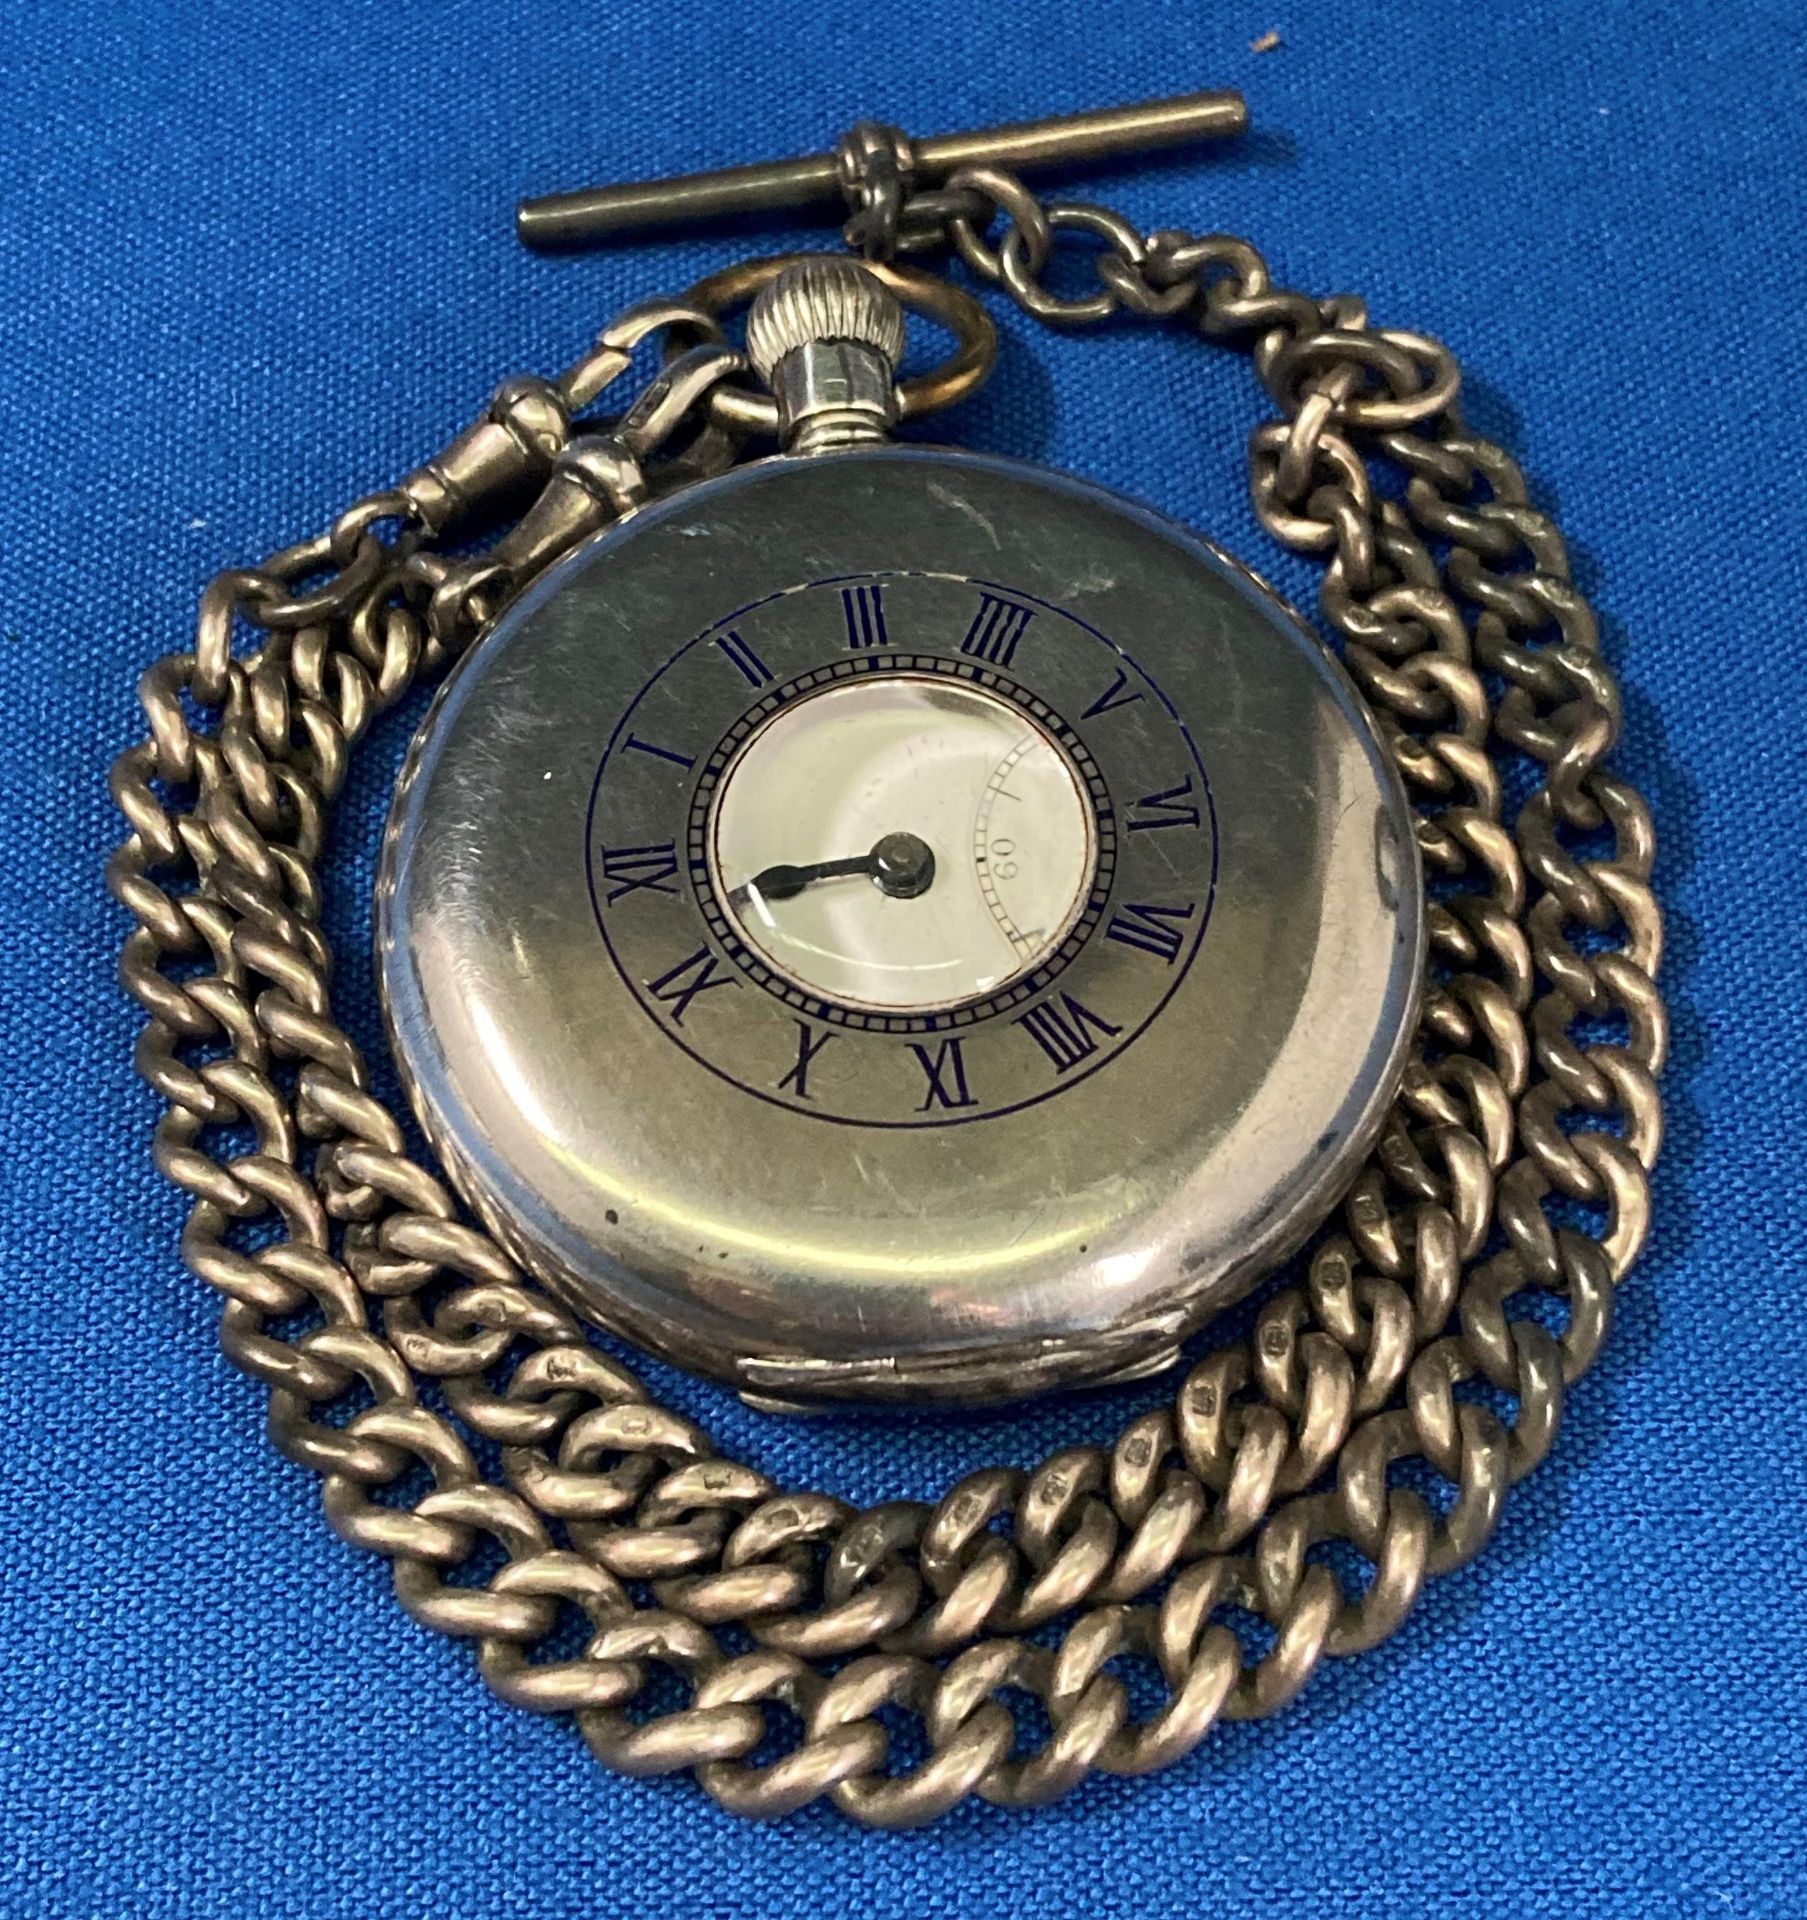 A silver (hallmarked) pocket watch by JWB London 1939 and a vintage silver (hallmarked) fob T-bar